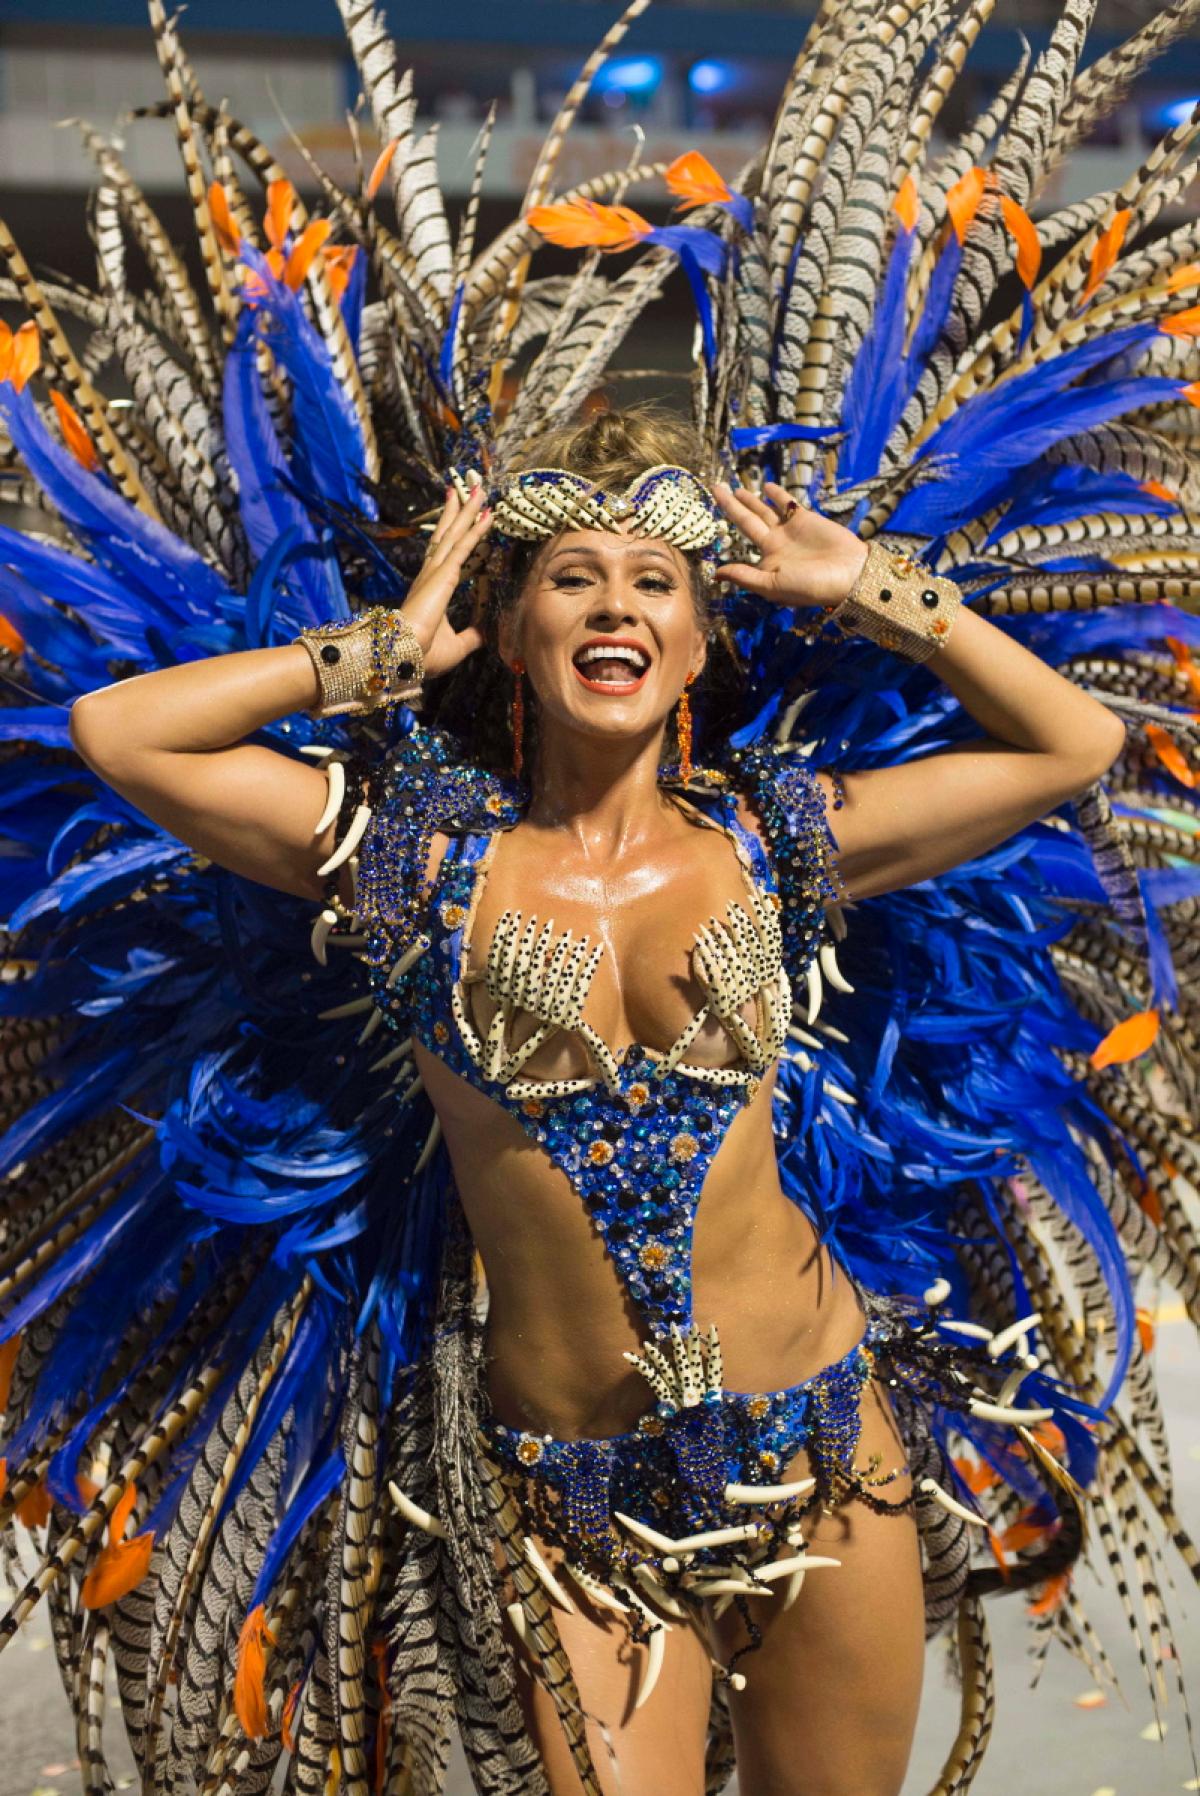 11 Of The Hottest Samba Dancers From The 2015 Rio Carnival - Page 6 of 11 - ShareJunkies - Your 